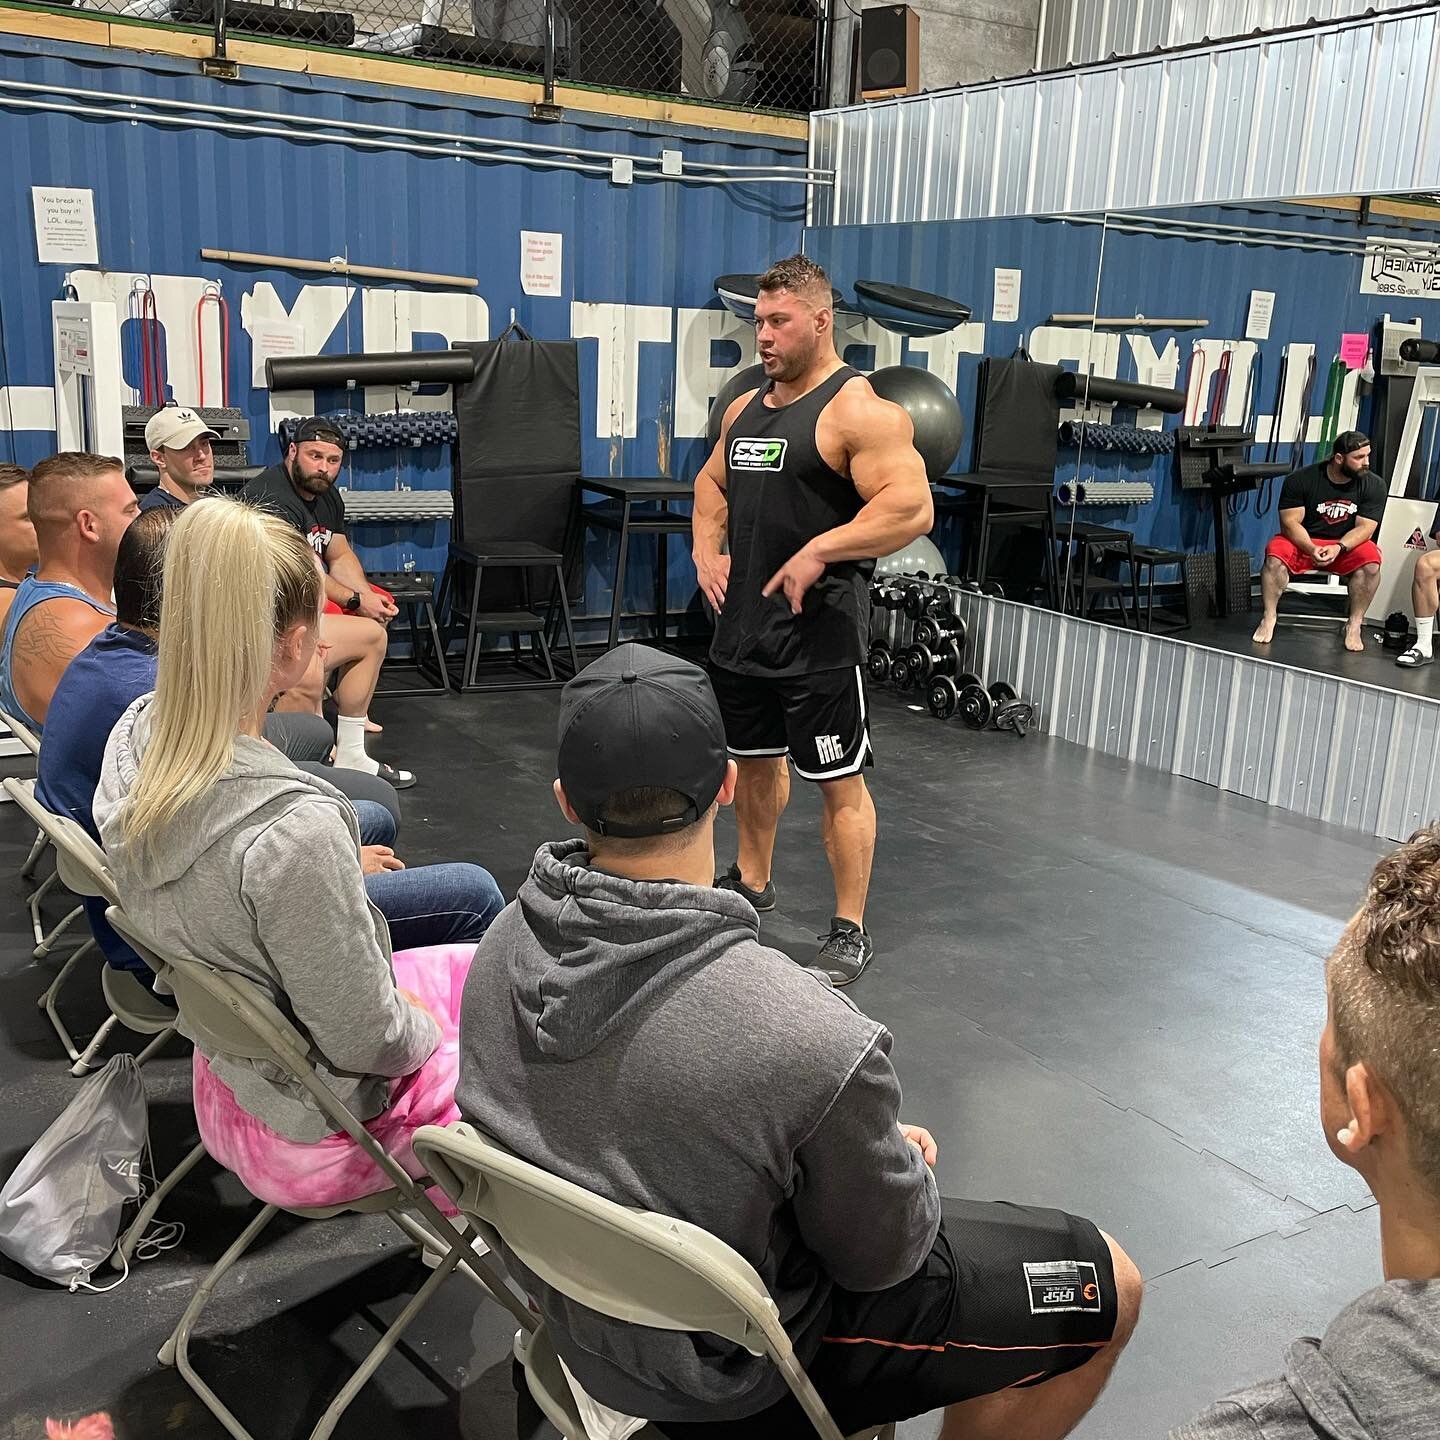 Had an amazing time at our posing seminar this morning with @strandstrong. The athletes learned what to expect on stage and ways to improve their form with a few tricks of the trade. Thank you Robin for taking time out of your schedule to visit us @f